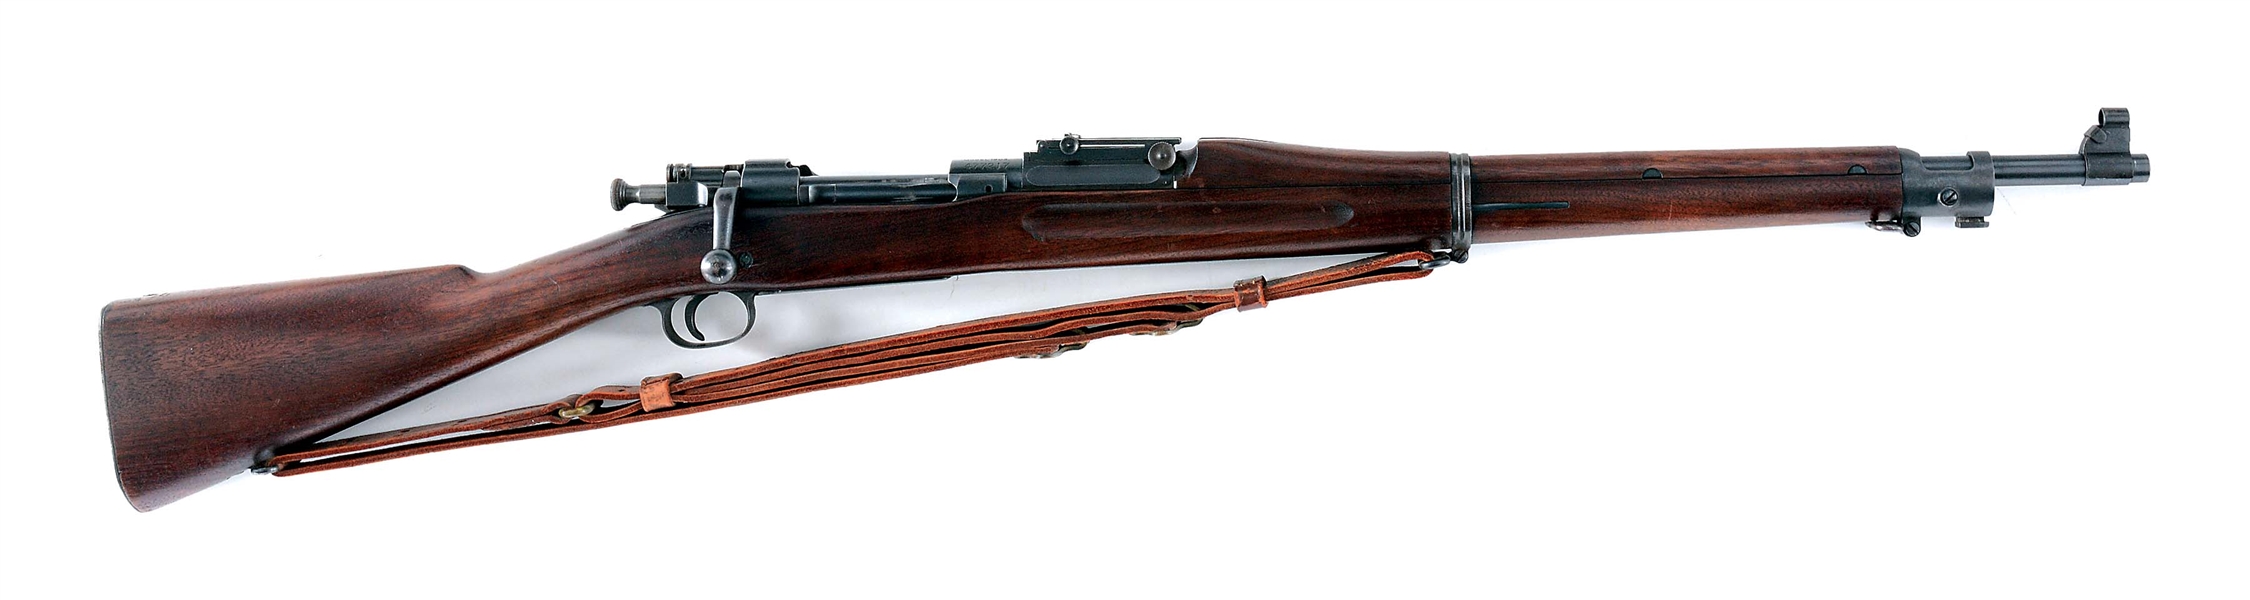 (C) HIGH CONDITION U.S. SPRINGFIELD MODEL 1903 BOLT ACTION RIFLE (1911).